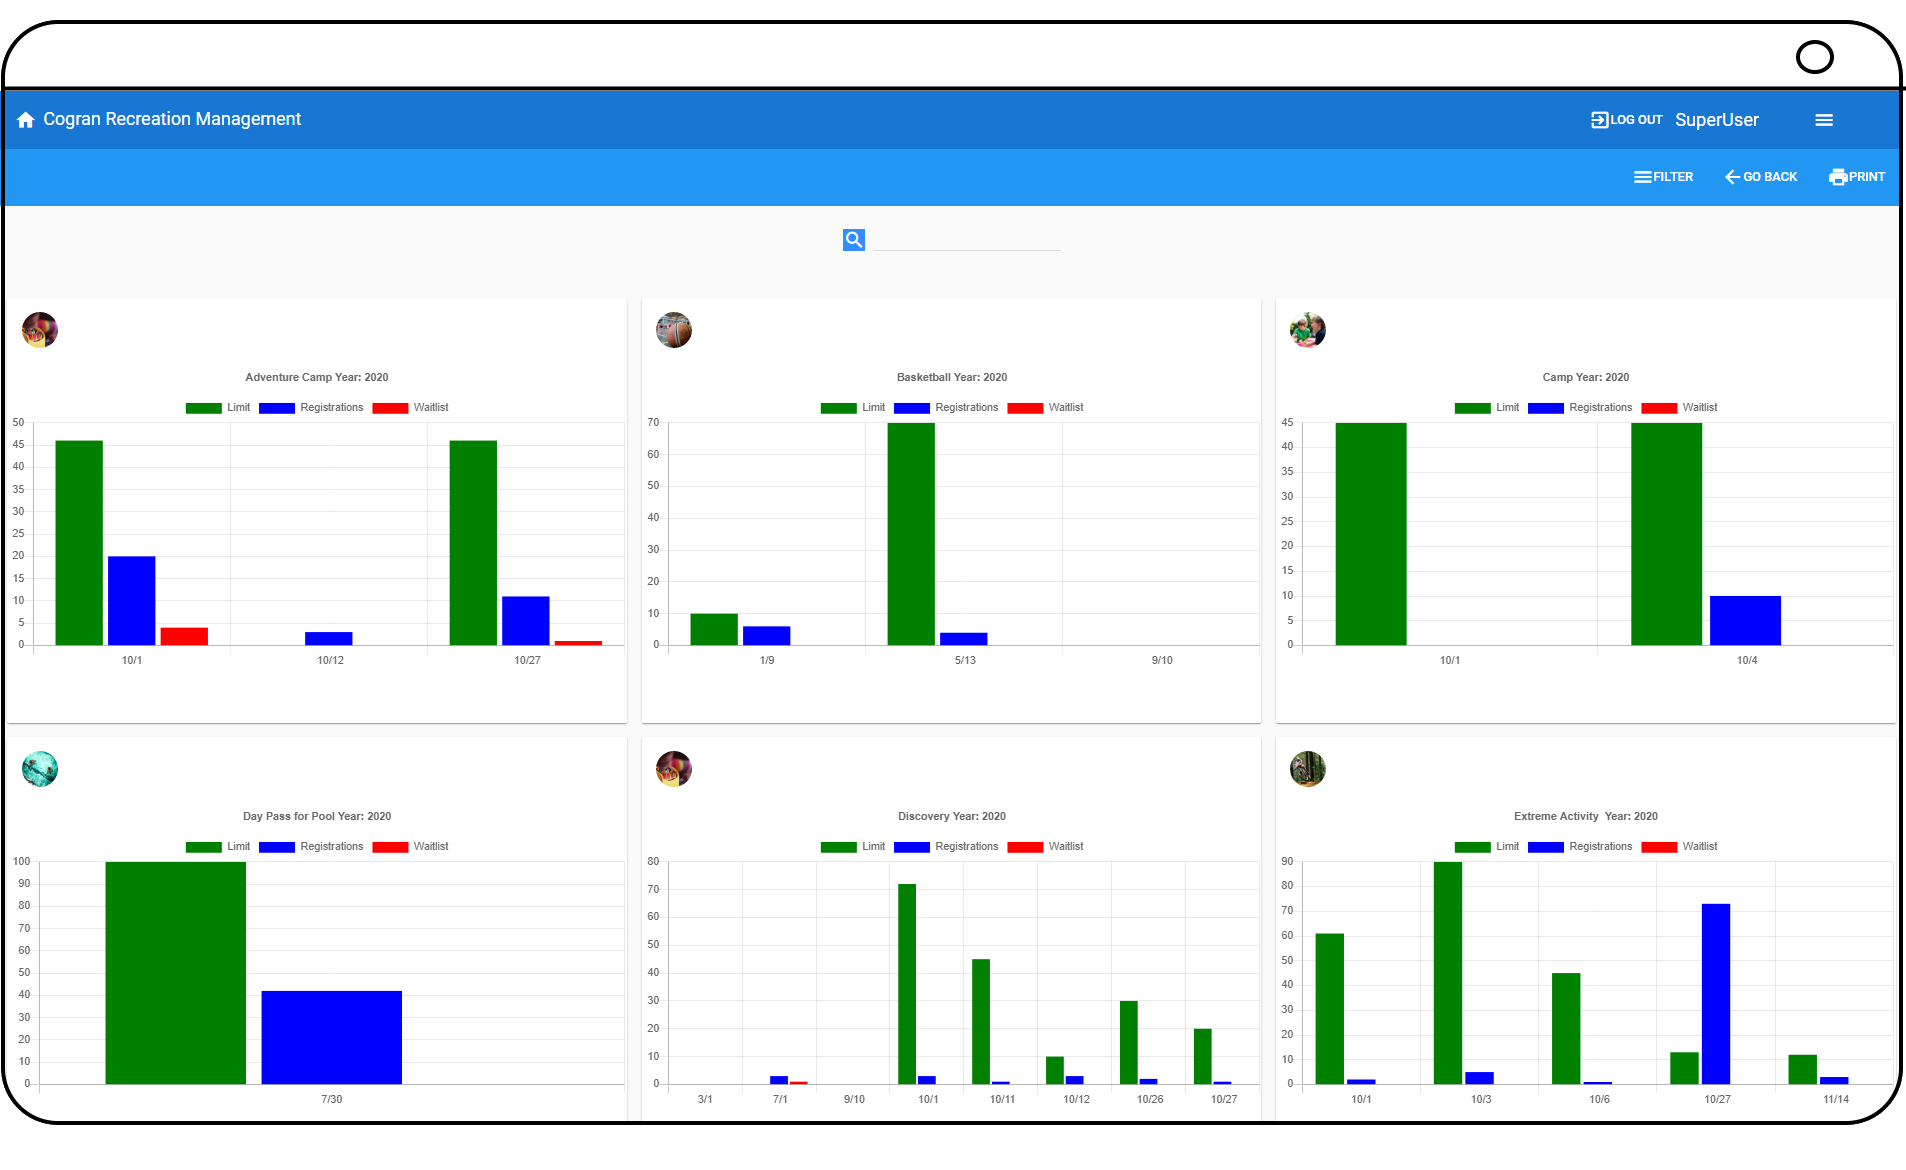 Cogran offers a range of the most commonly used reports in chart view. These visualizations make it easy to truly comprehend the information in Cogran’s extensive reports, allowing easy-at-glance understanding of trends and relational information.